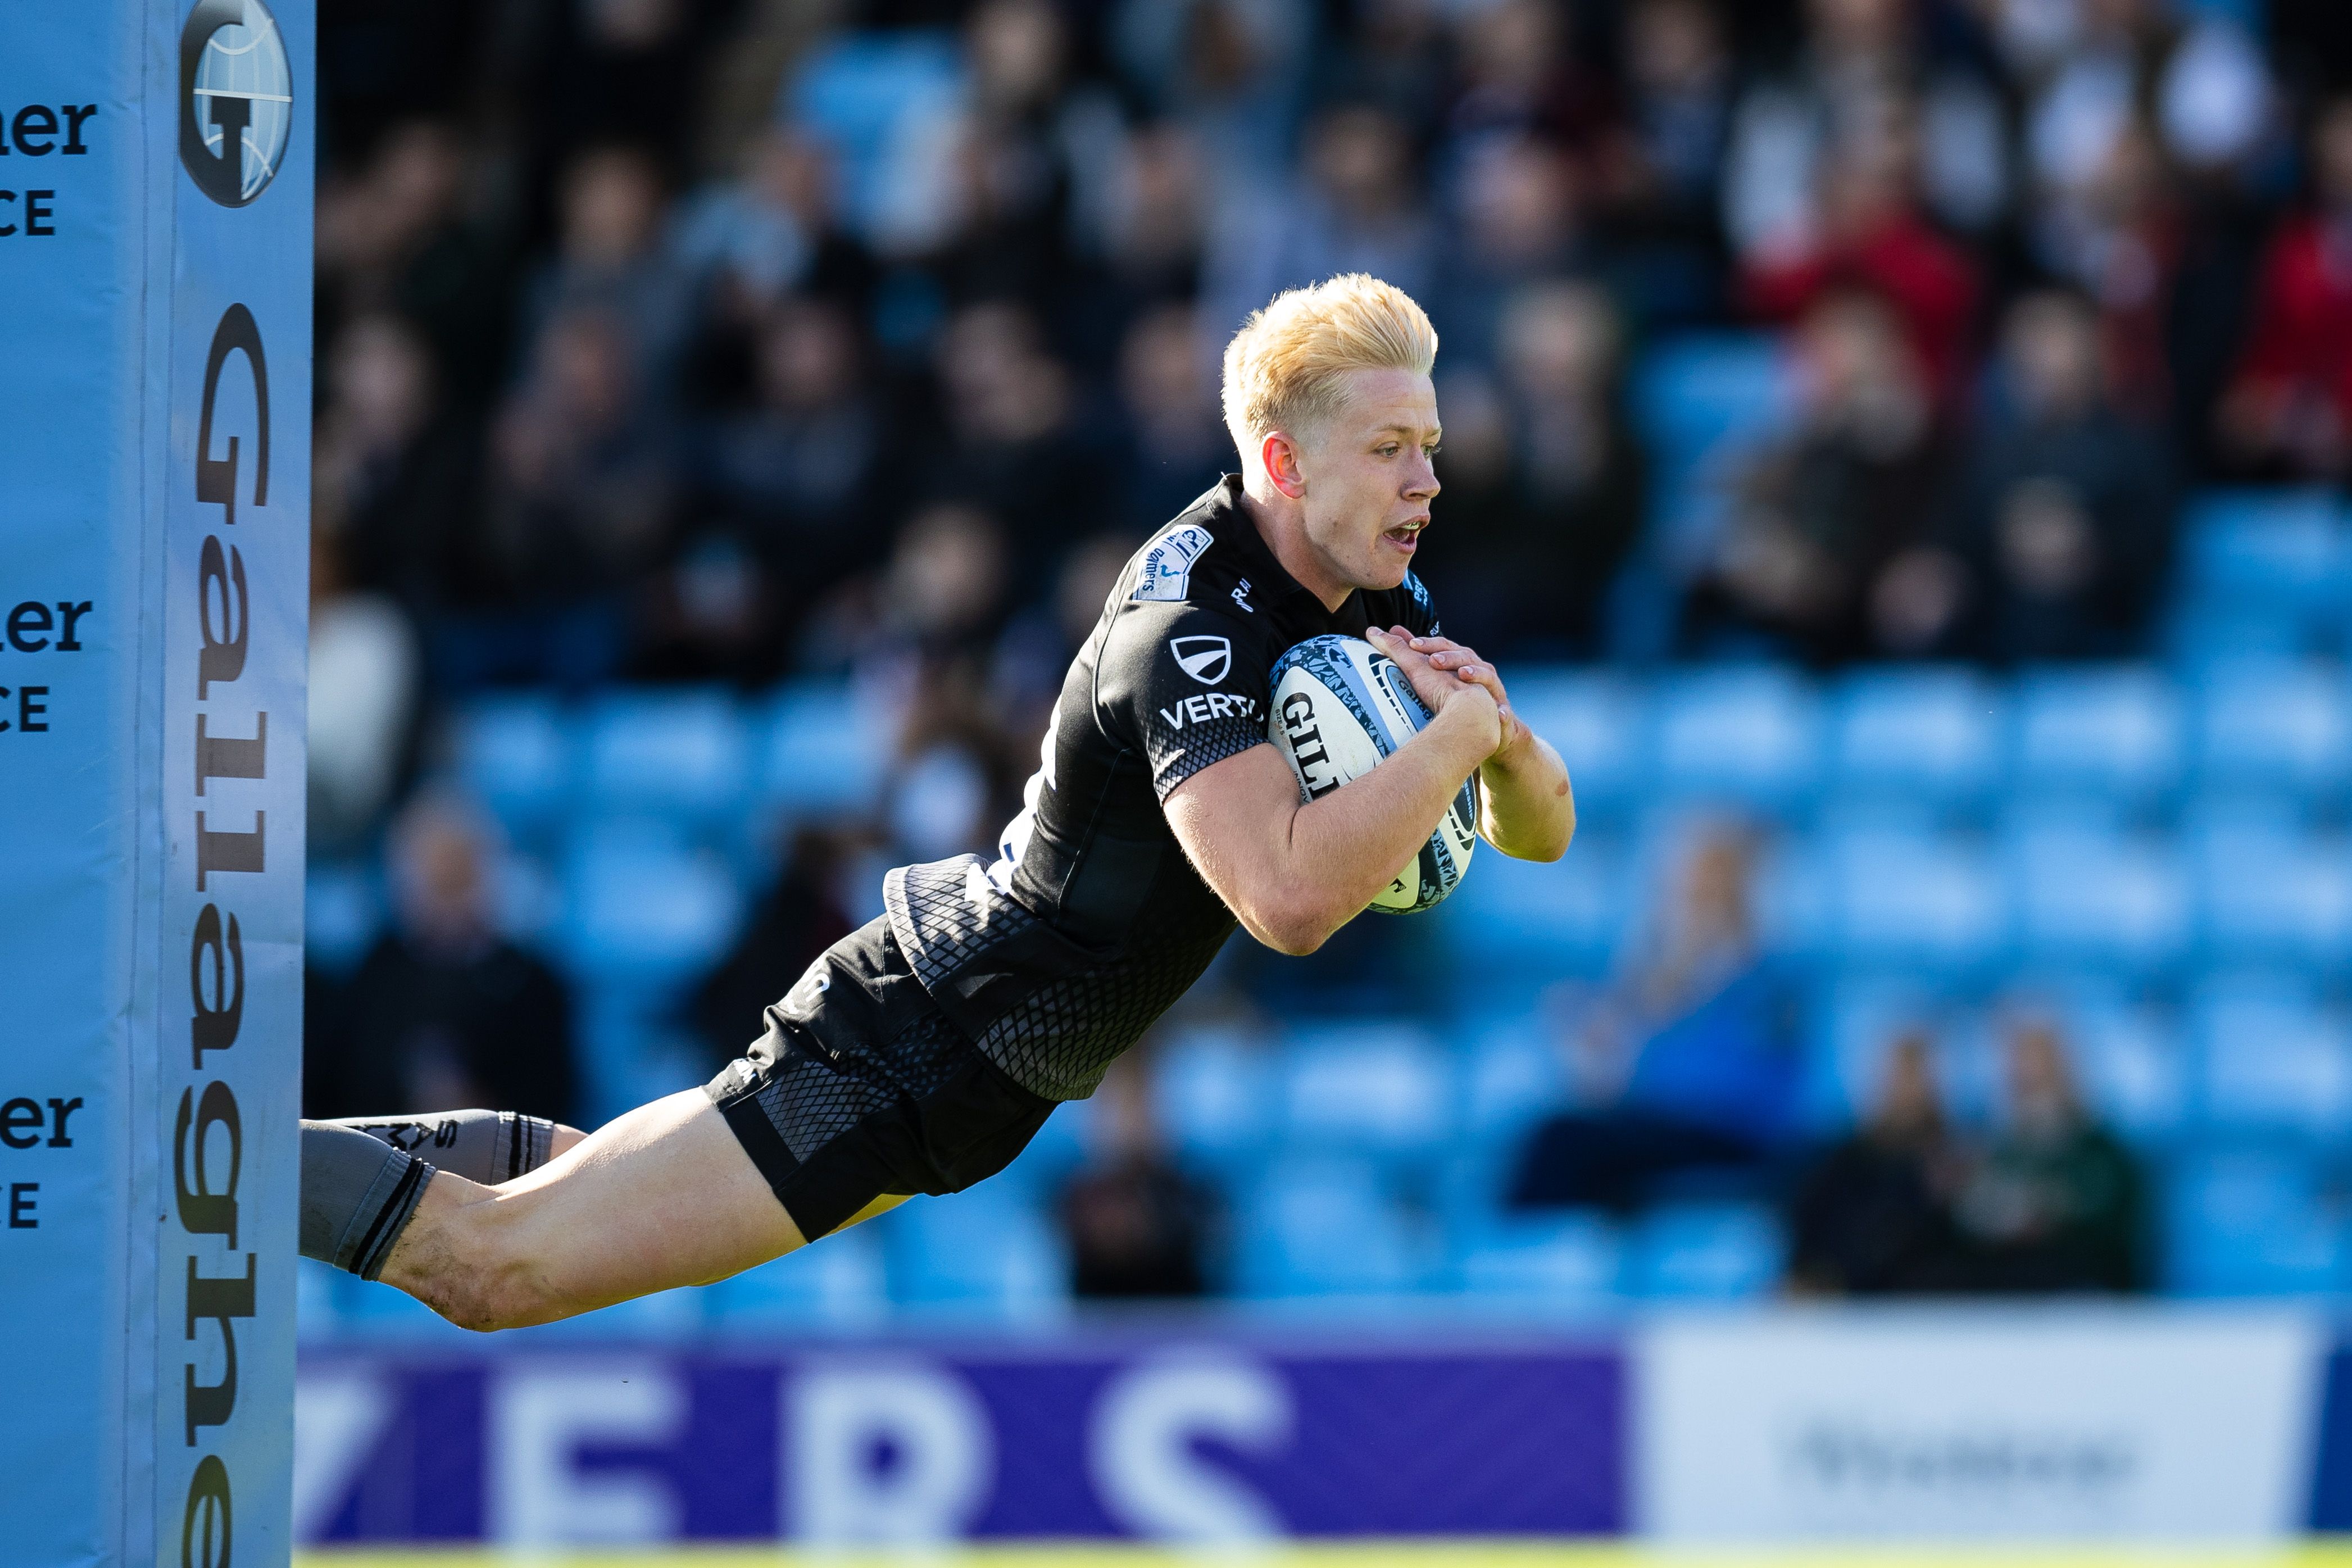 Stunning Start To League Campaign For Exeter Chiefs